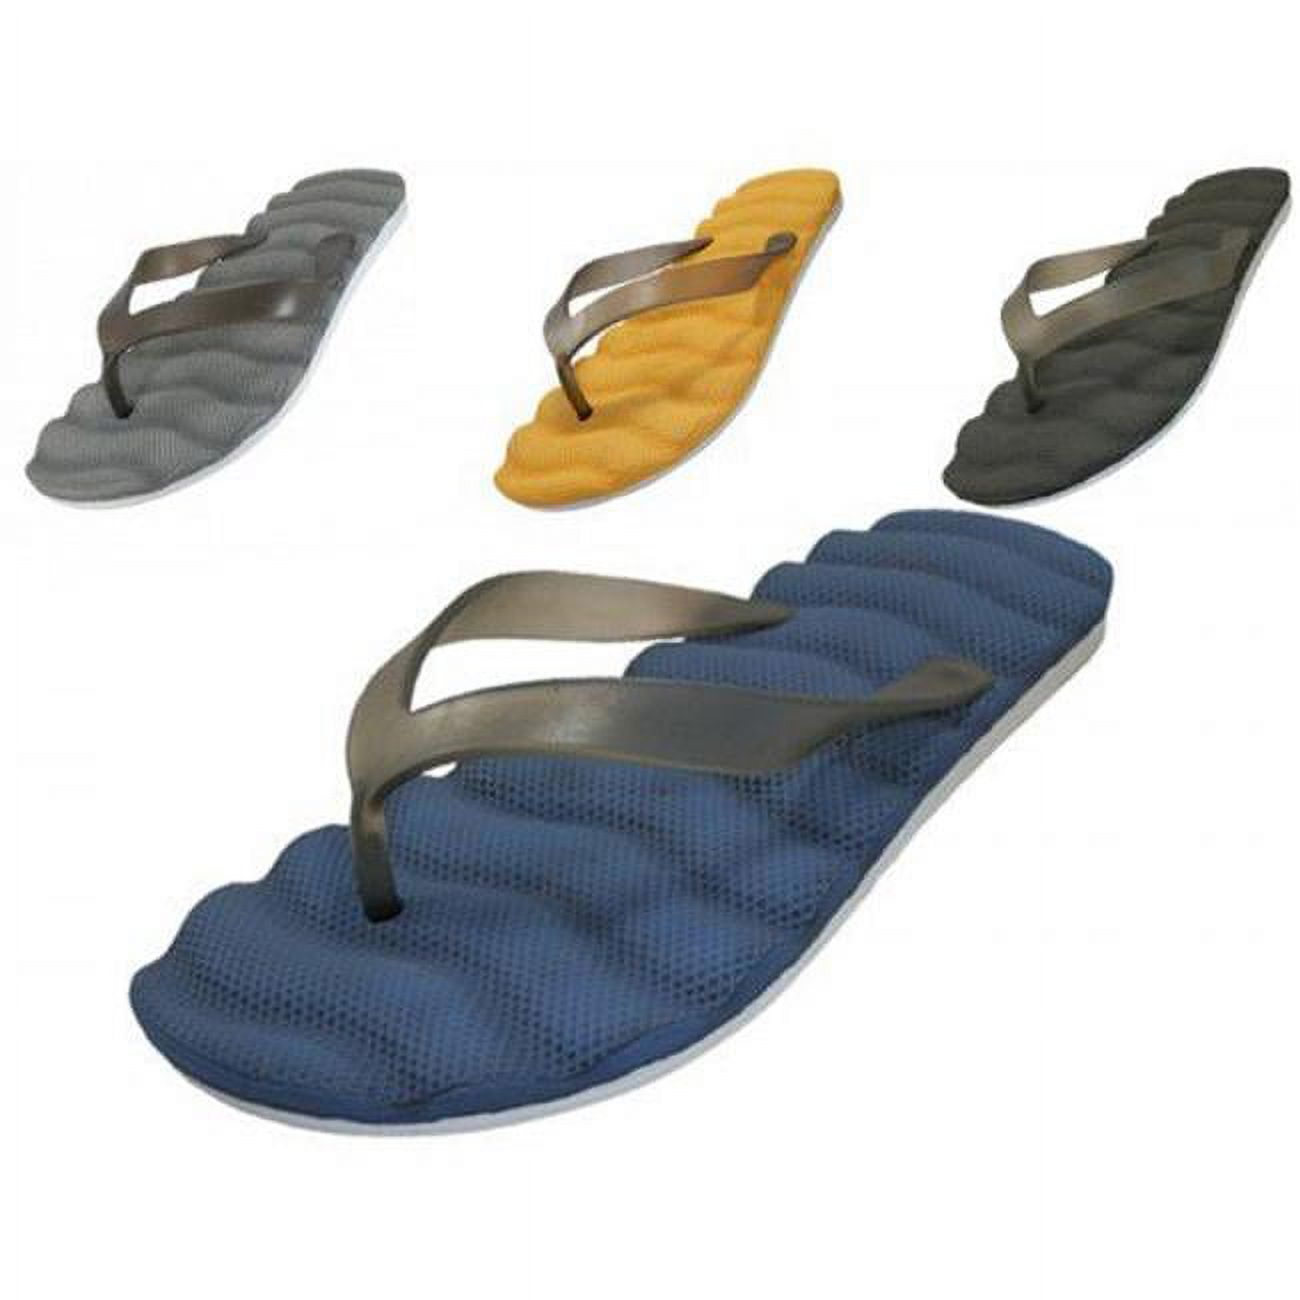 DDI 1934270 Men&apos;s Insole Waves Bed Flip Flops Case of 48 - image 1 of 1